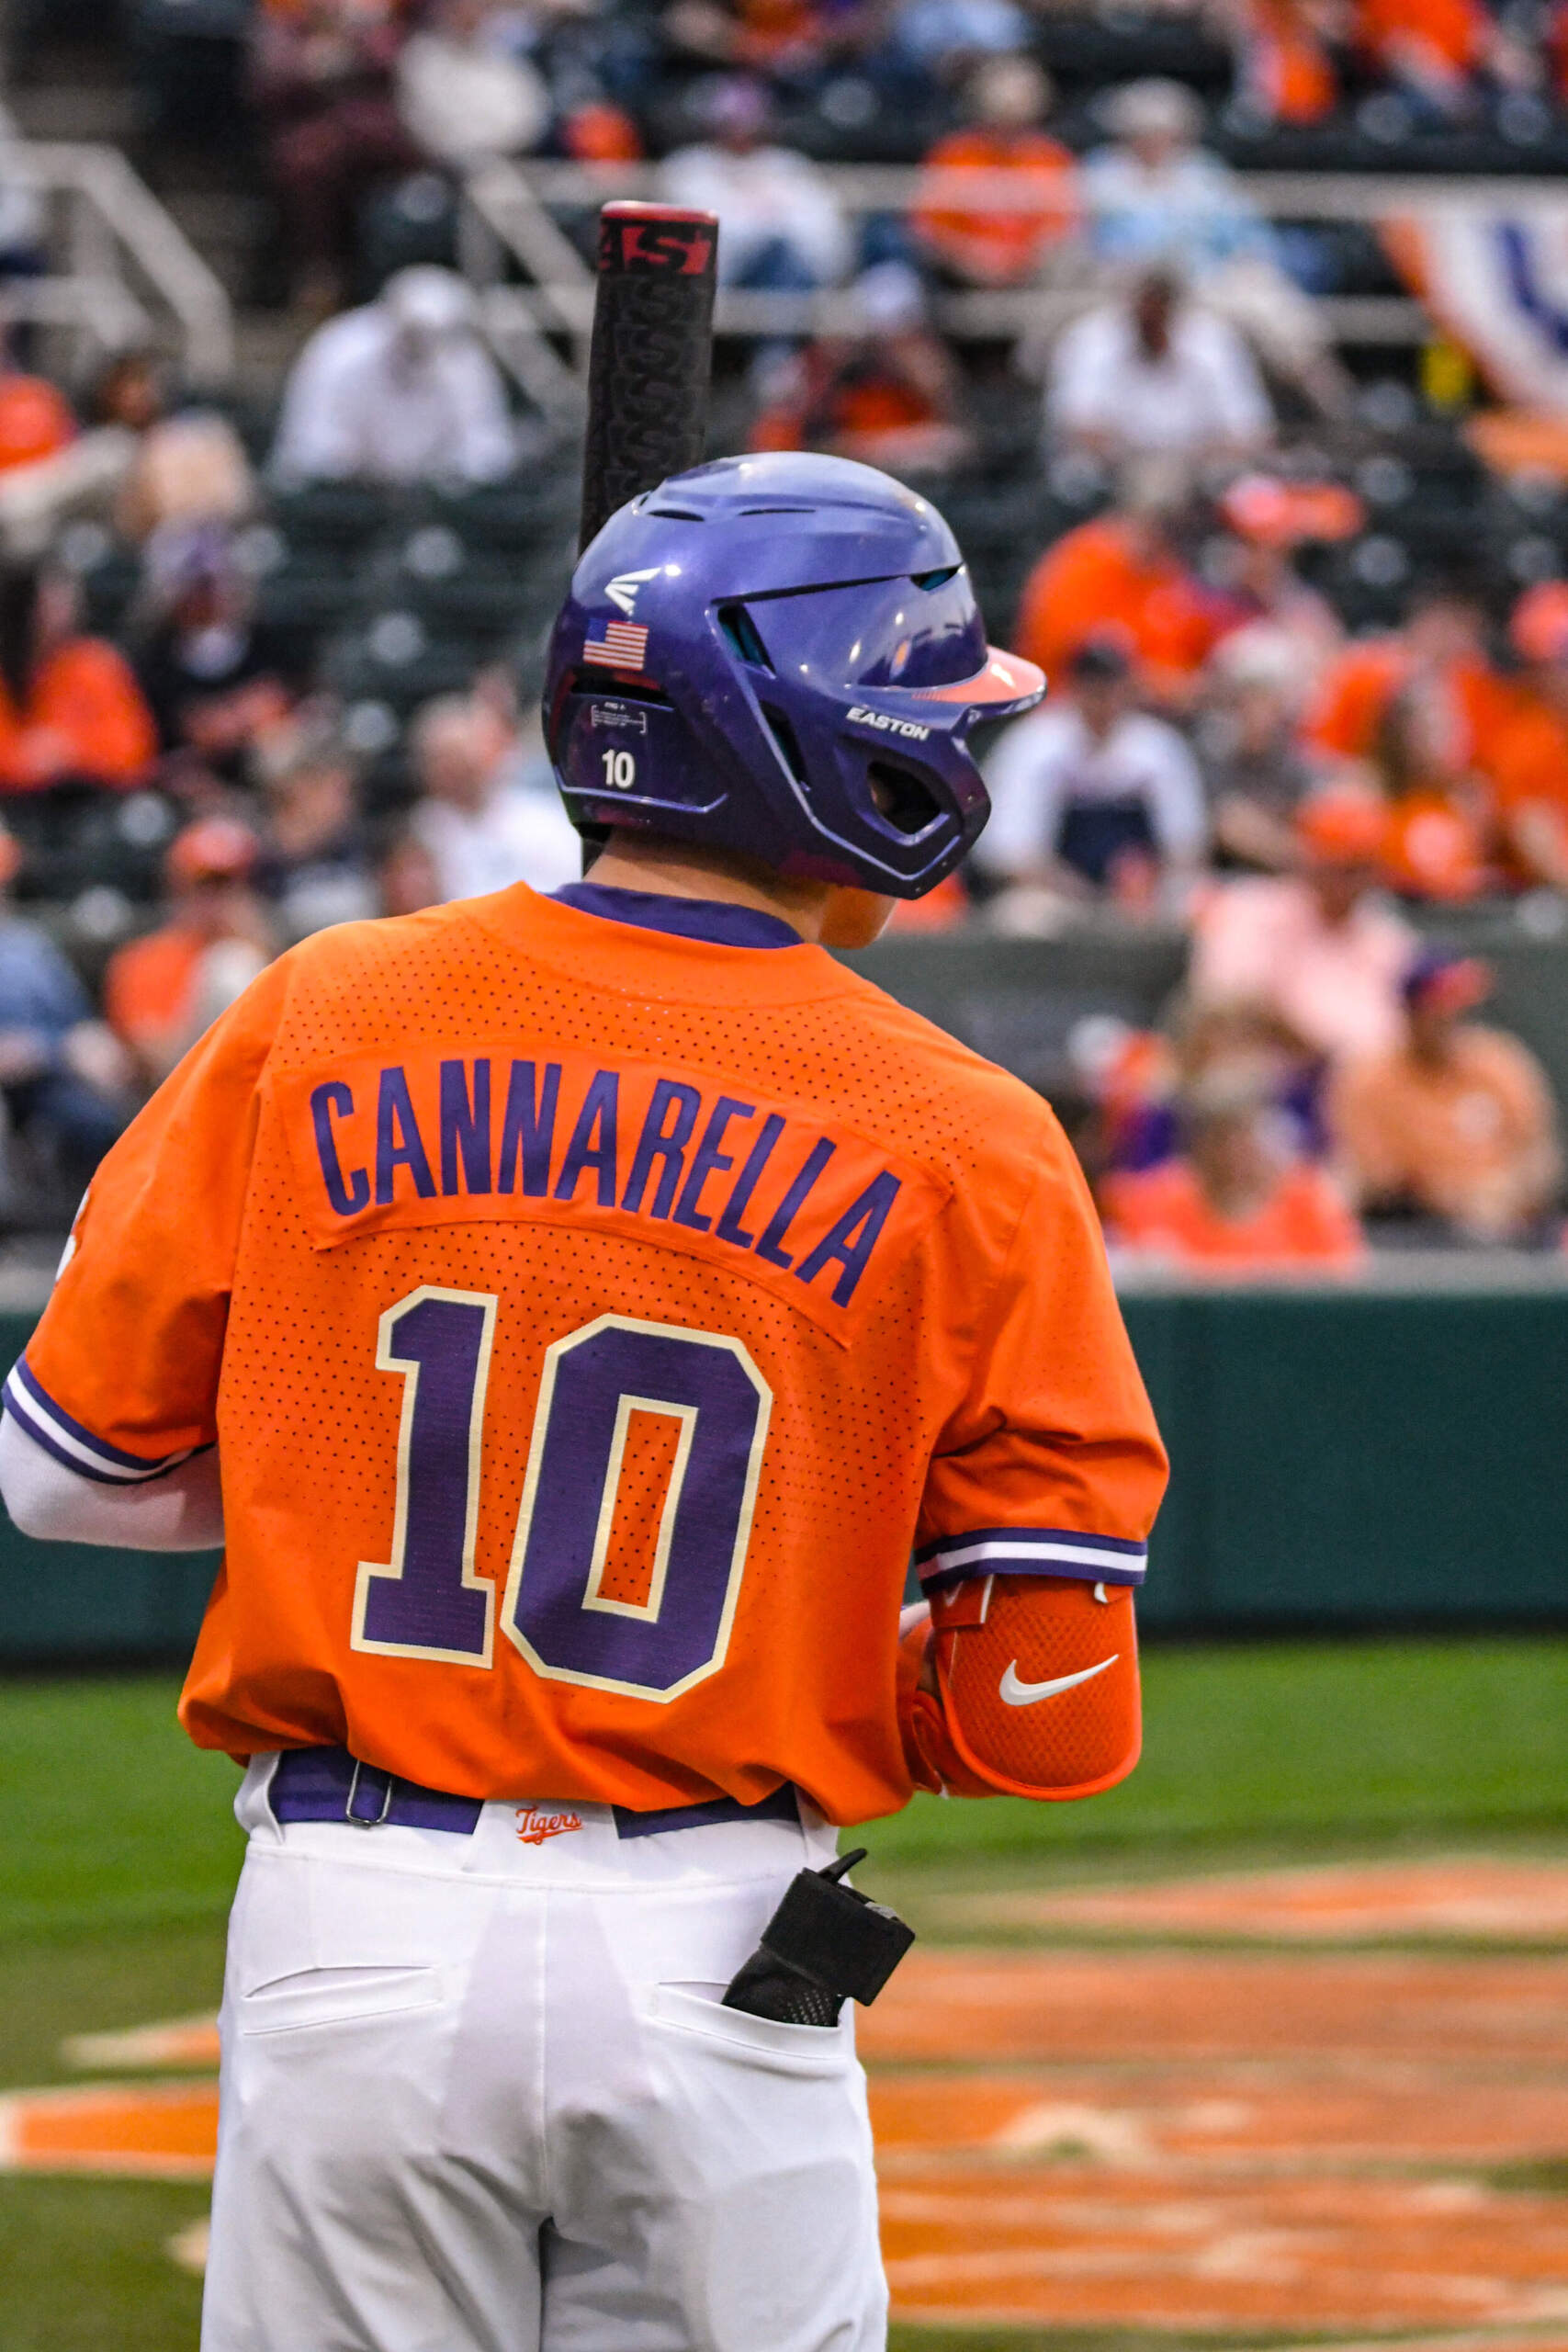 Clemson baseball loses game two against UCF in weekend series – The Tiger